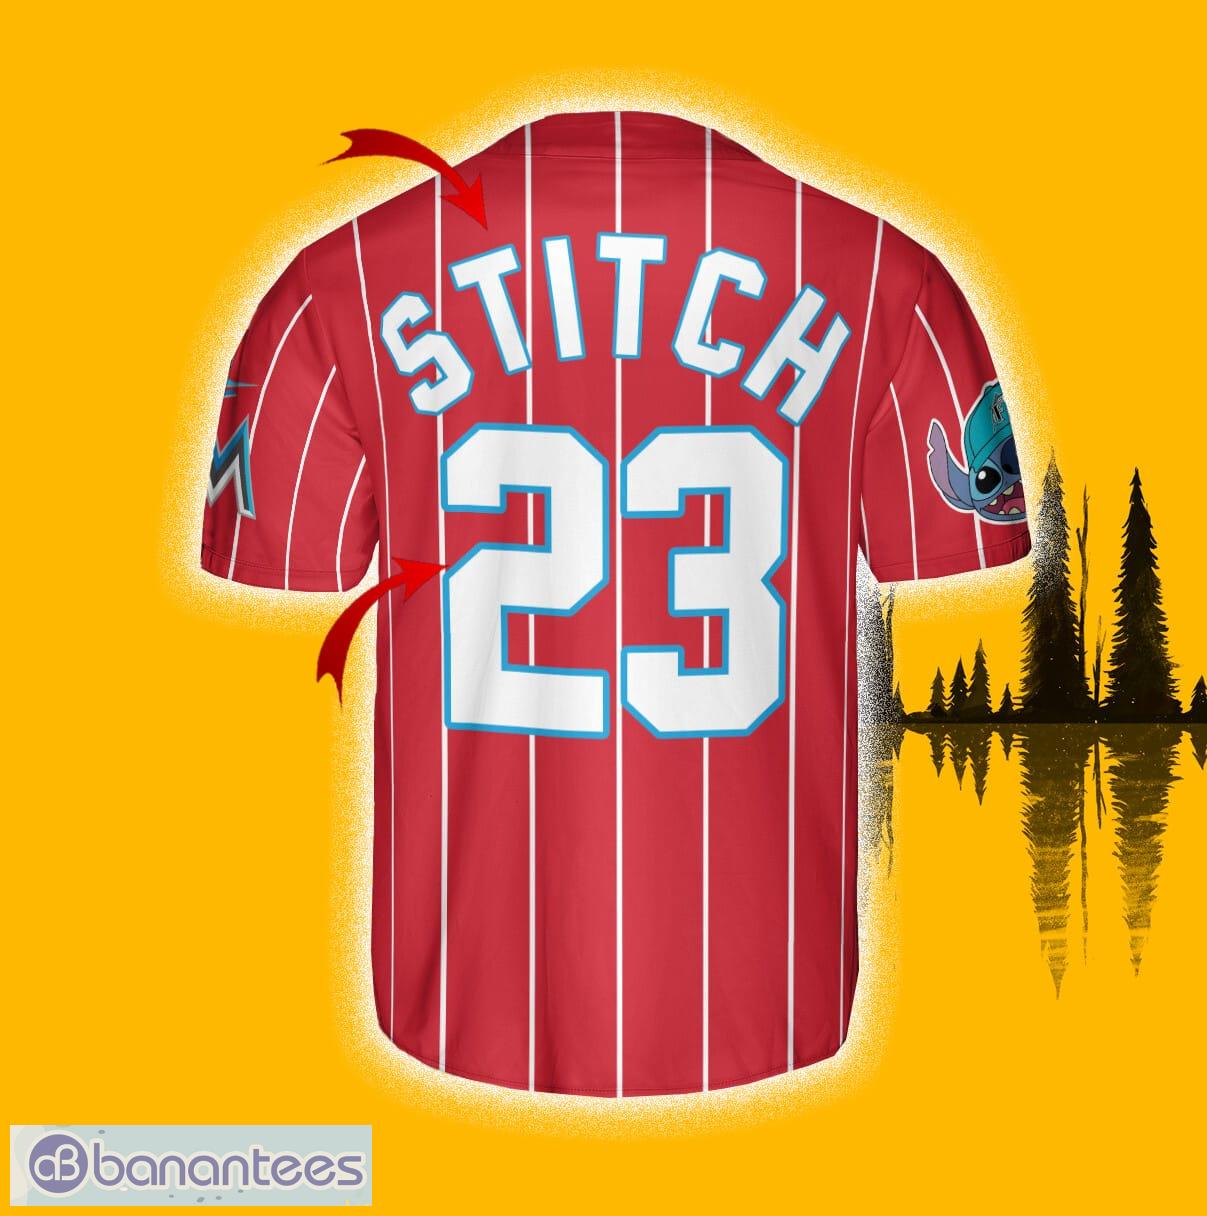 Miami Marlins Lilo & Stitch Jersey Baseball Shirt Red Custom Number And  Name - Banantees